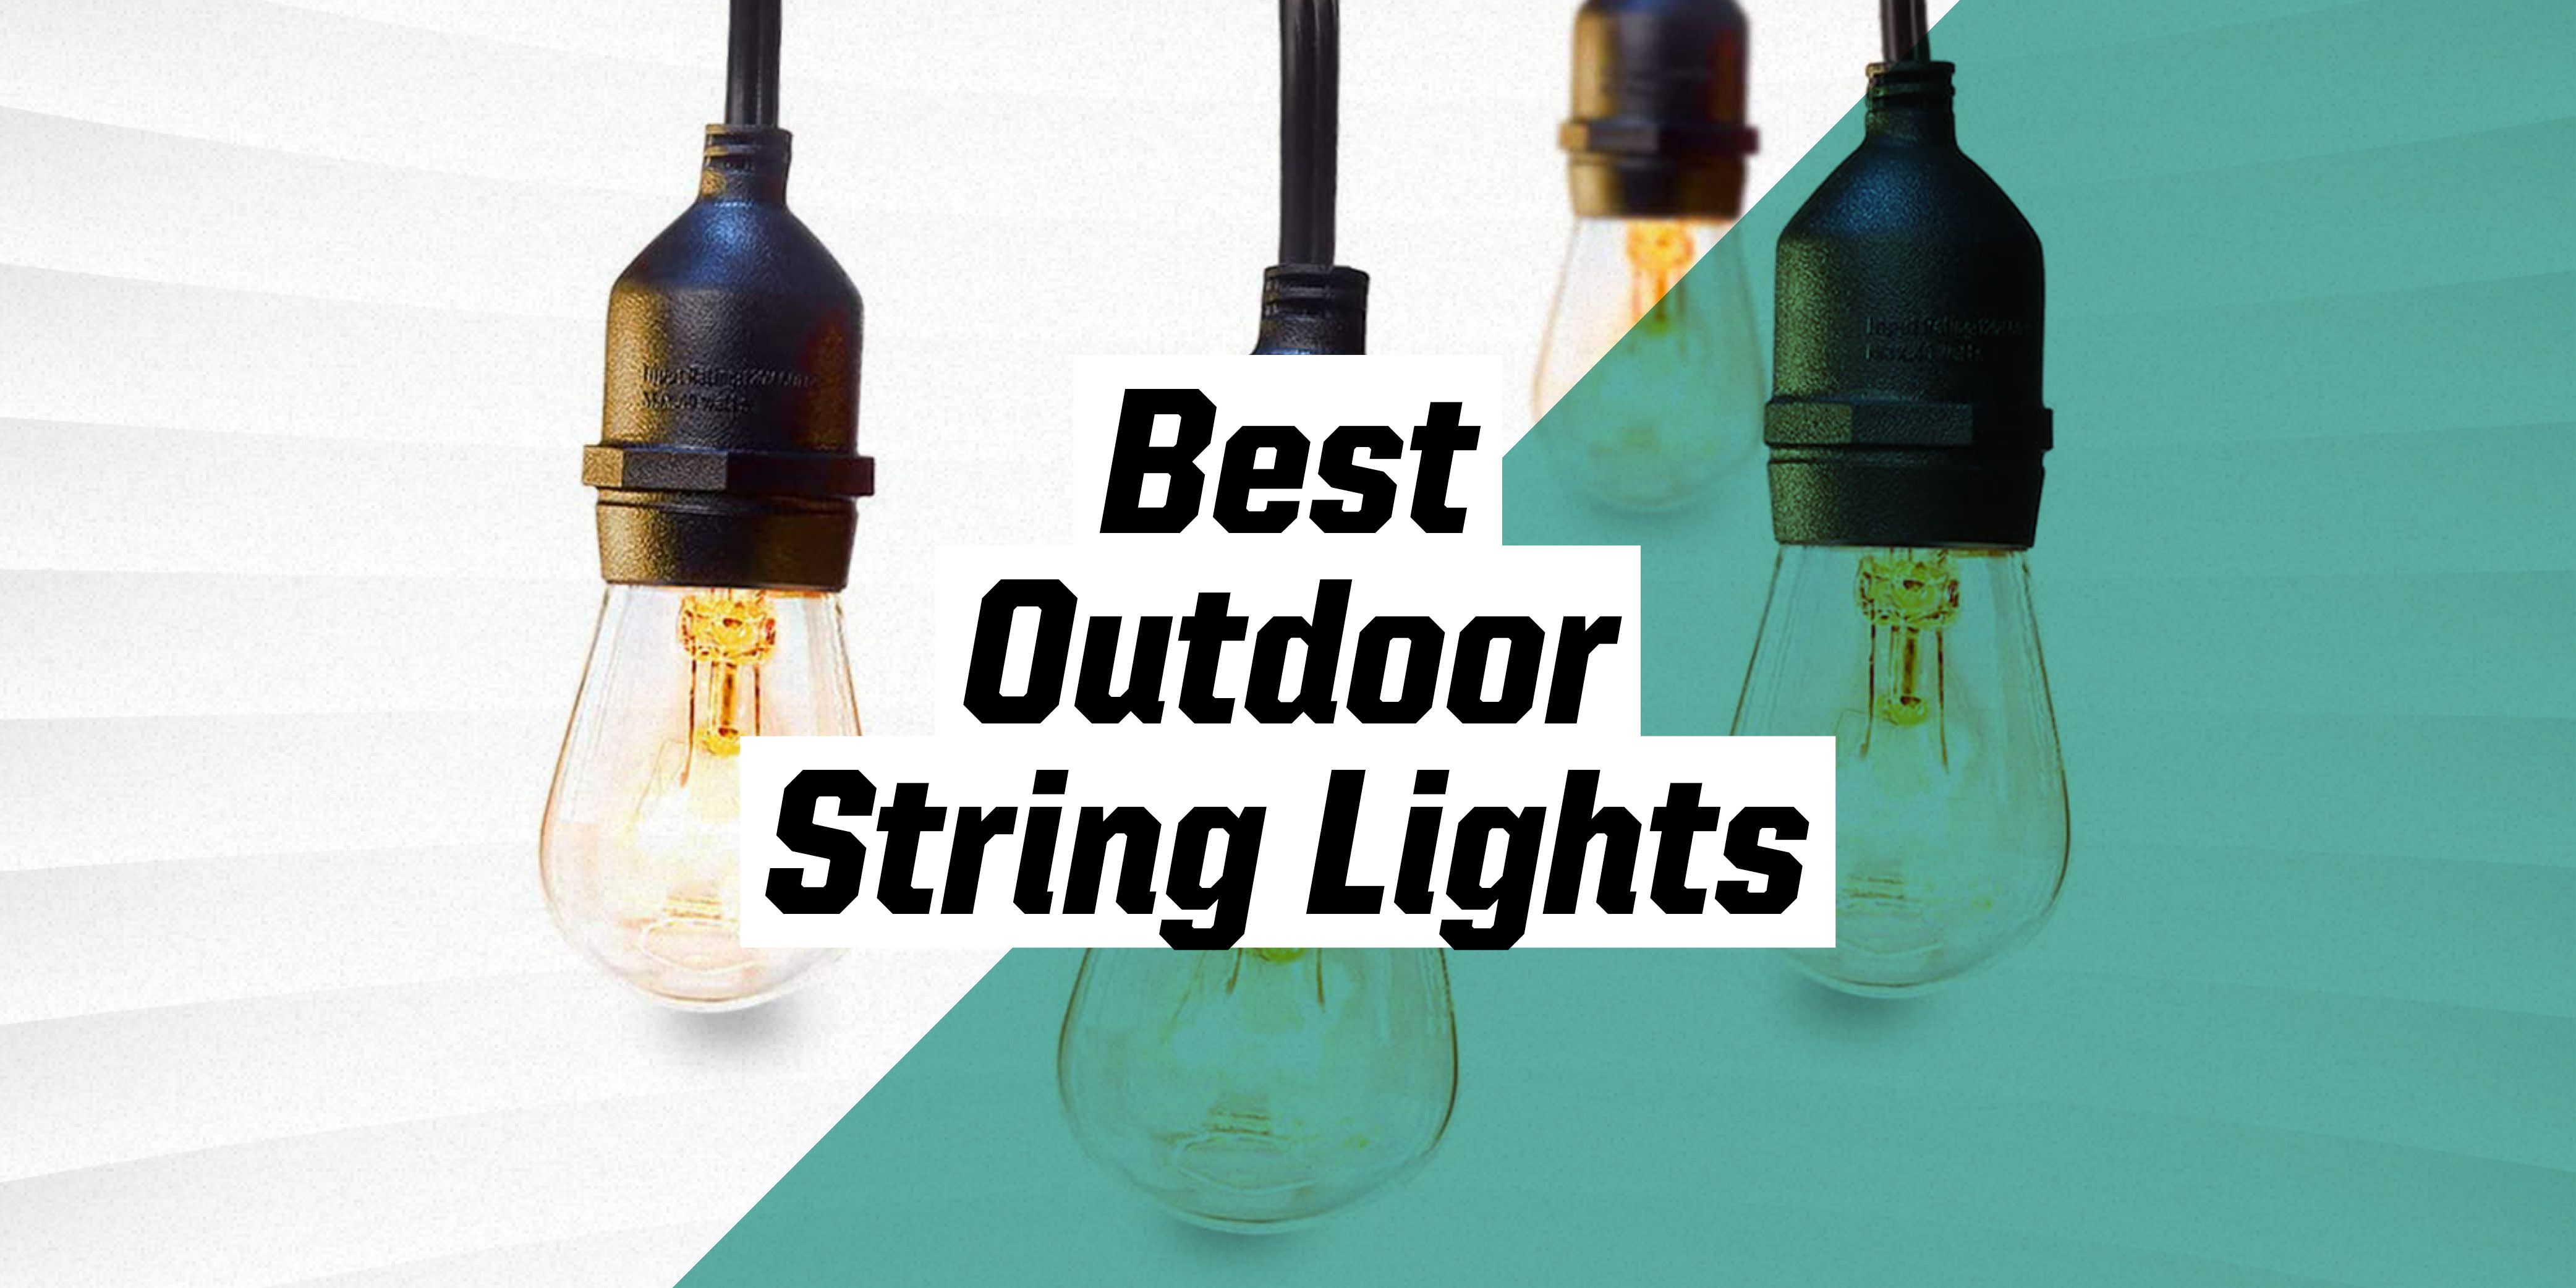 The 10 Best Outdoor String Lights 2021, Heavy Duty Outdoor String Lights Led